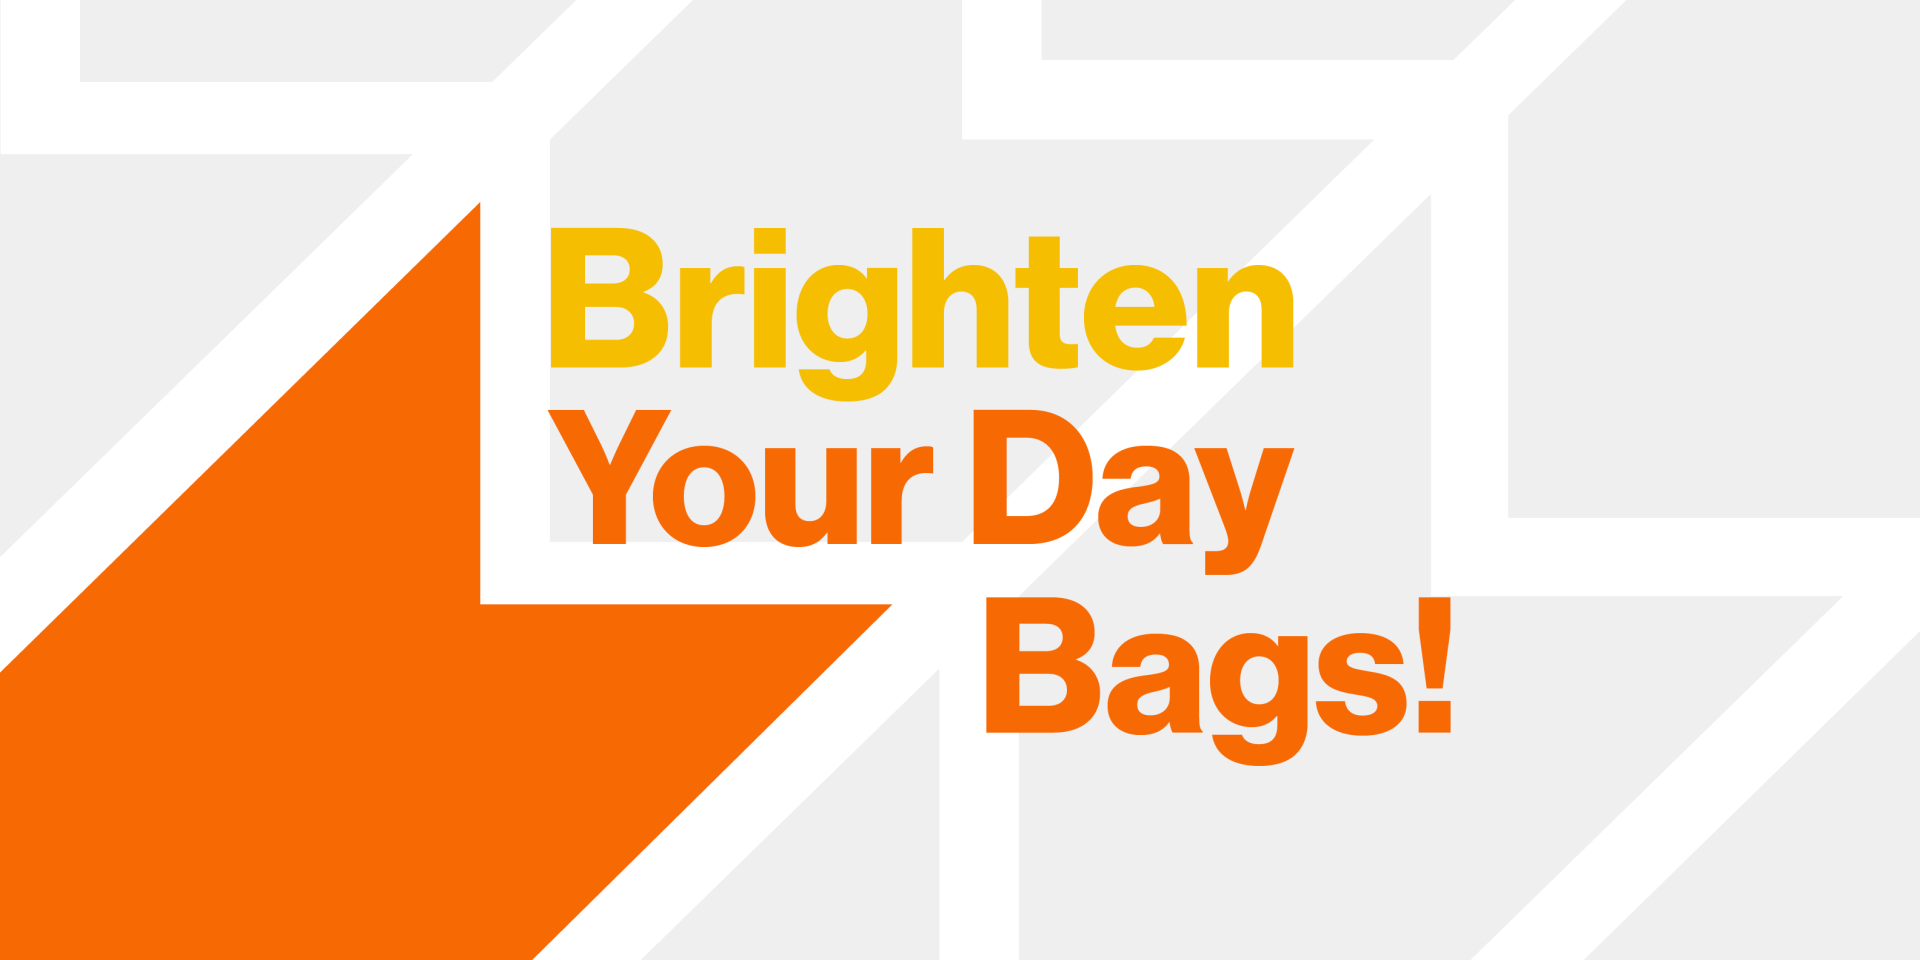 Brighten Your Day Bags